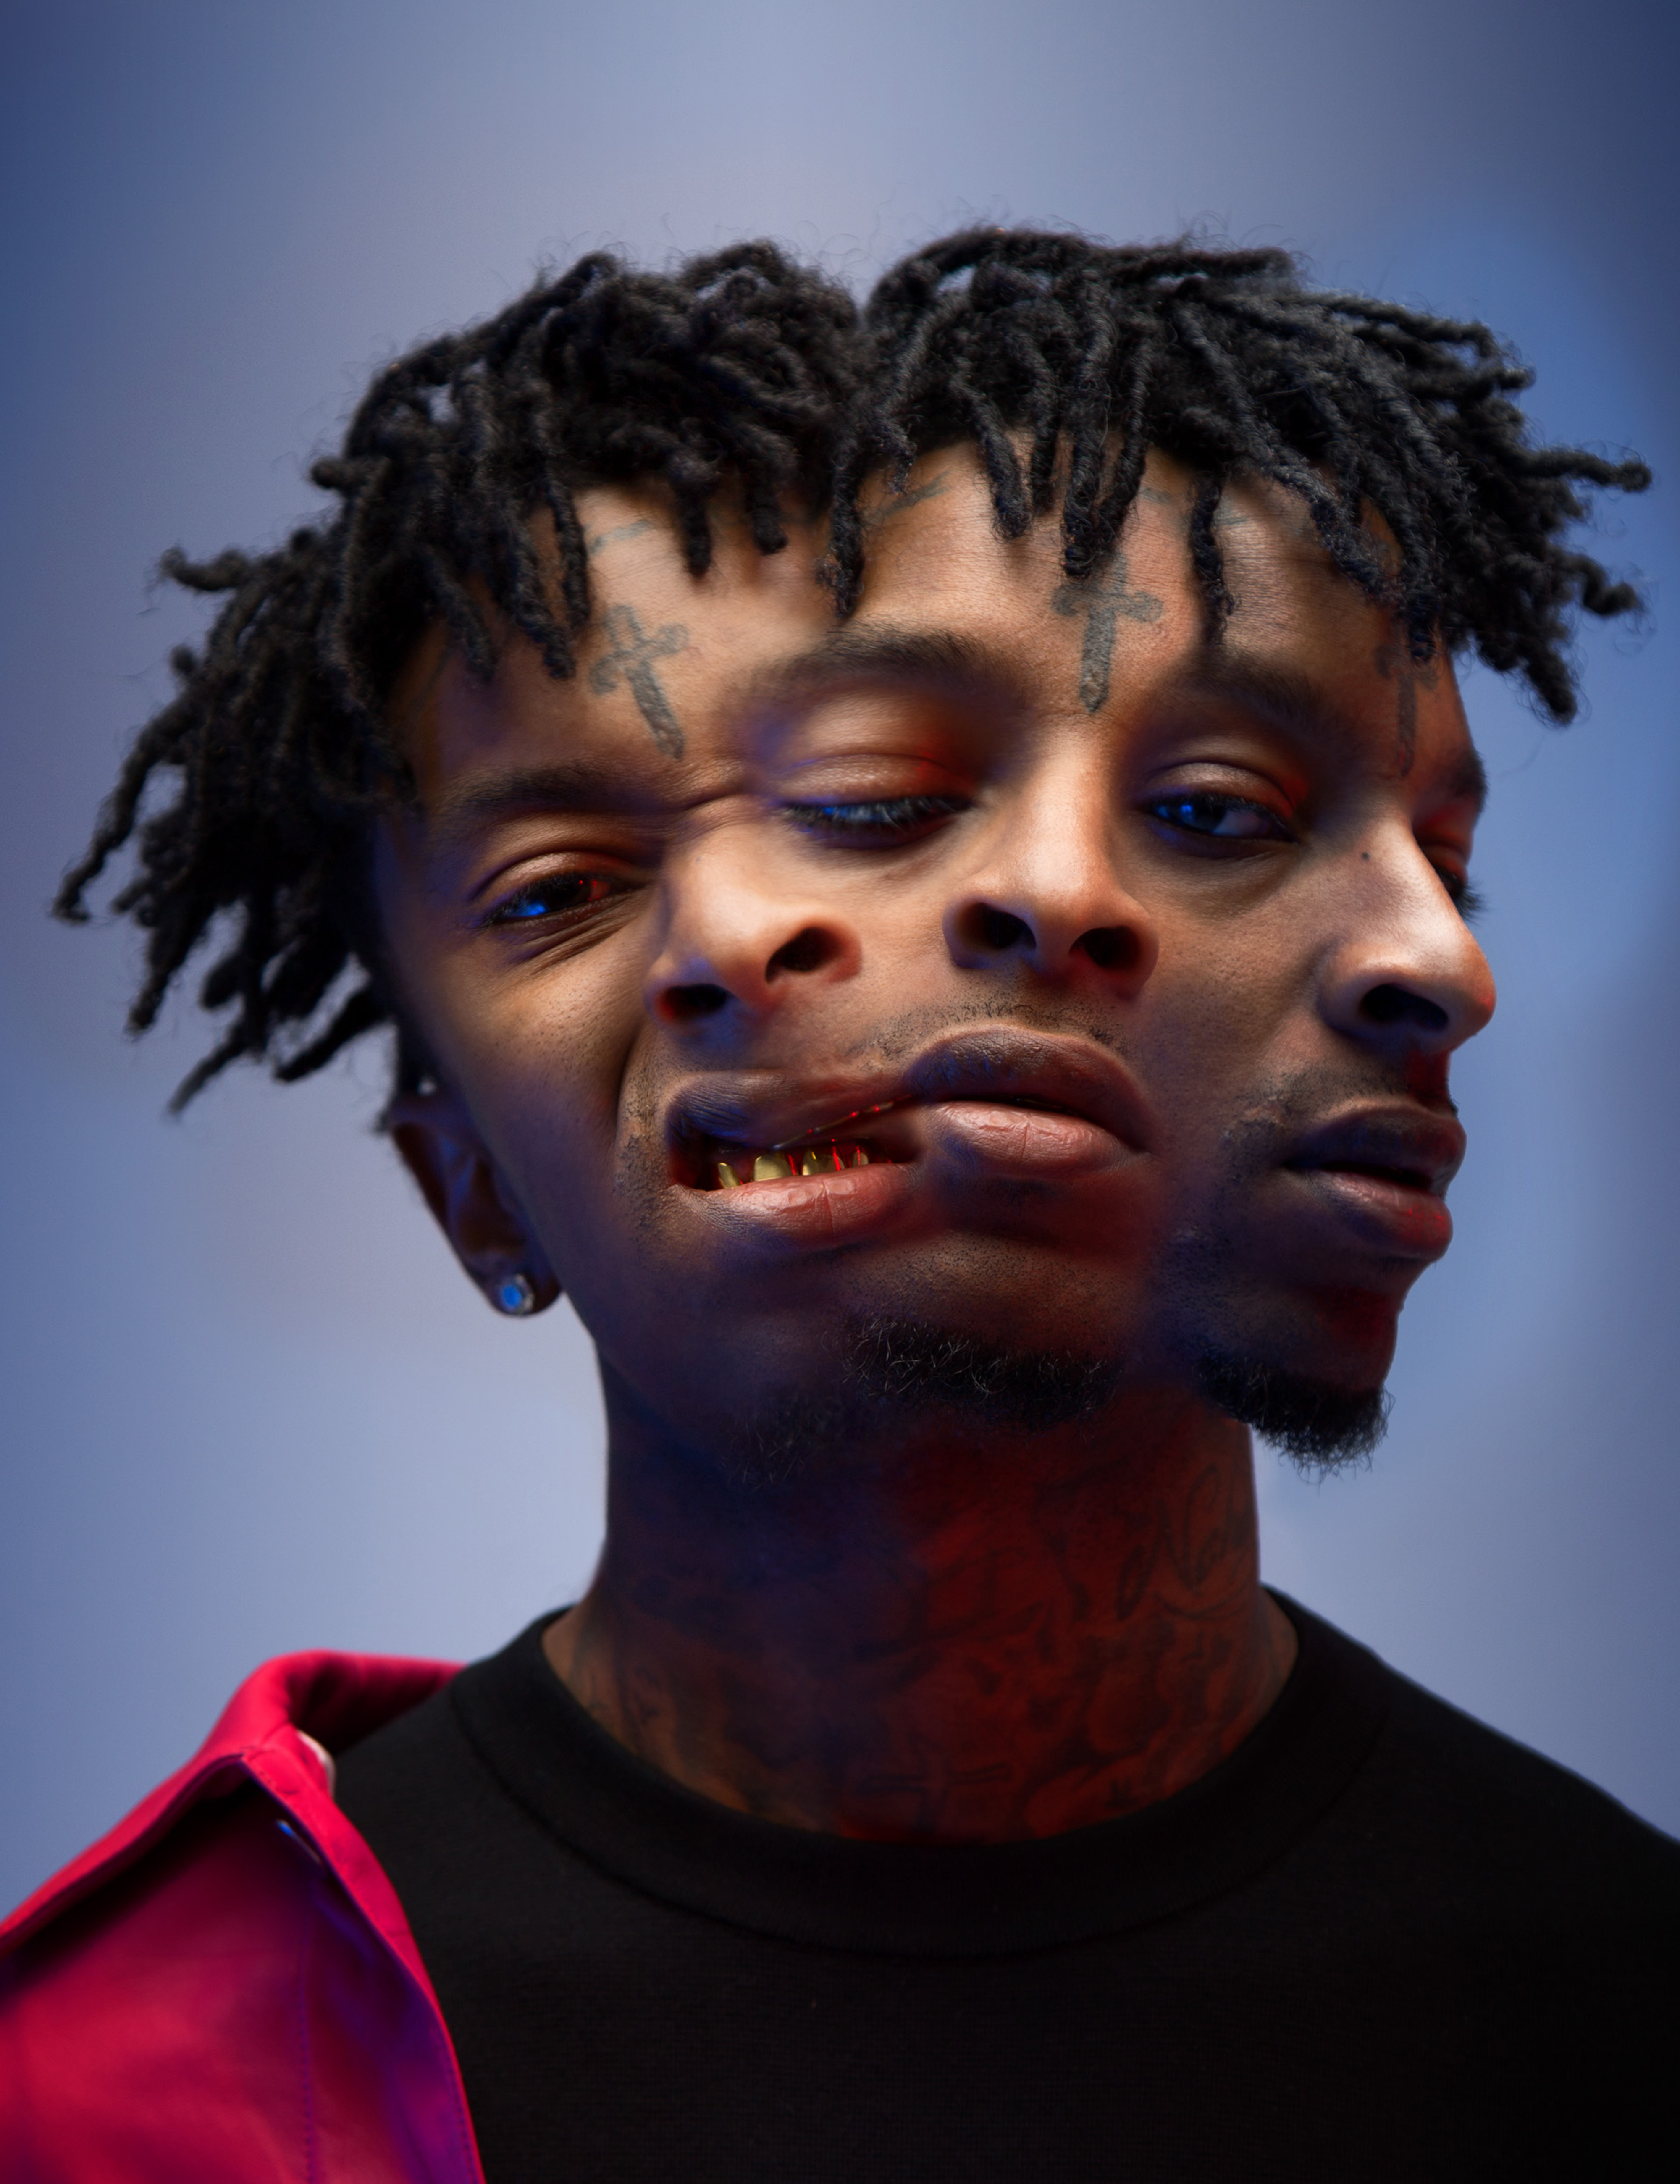 21 Savage Latest Songs Download